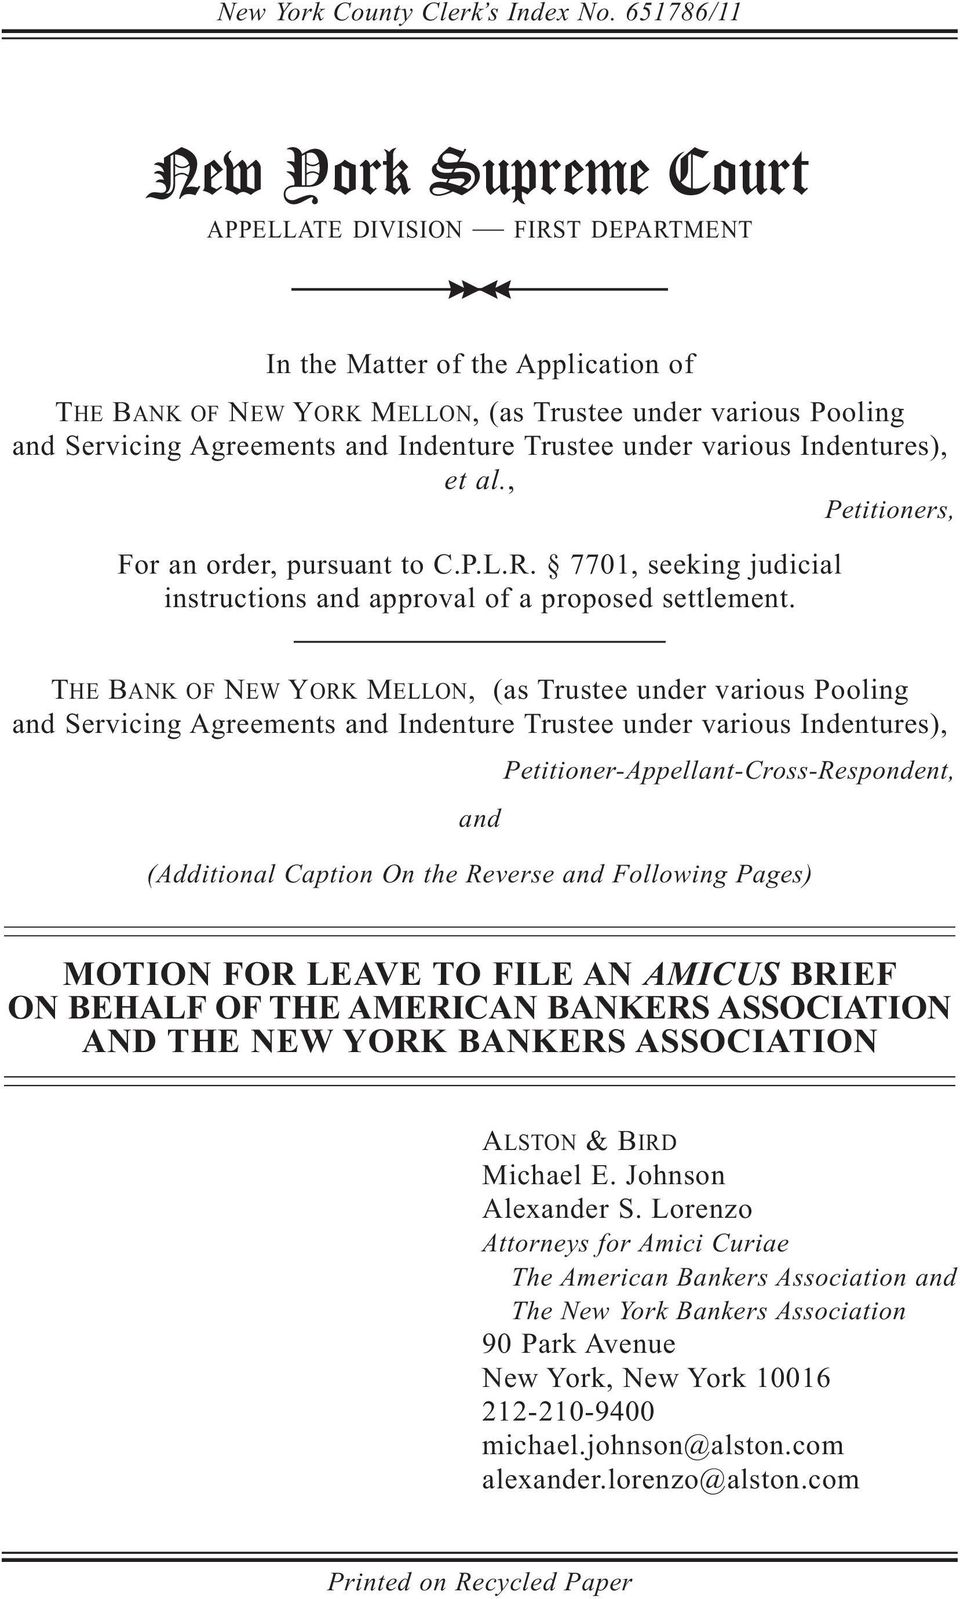 Indenture Trustee under various Indentures), et al., Petitioners, For an order, pursuant to C.P.L.R. 7701, seeking judicial instructions and approval of a proposed settlement.